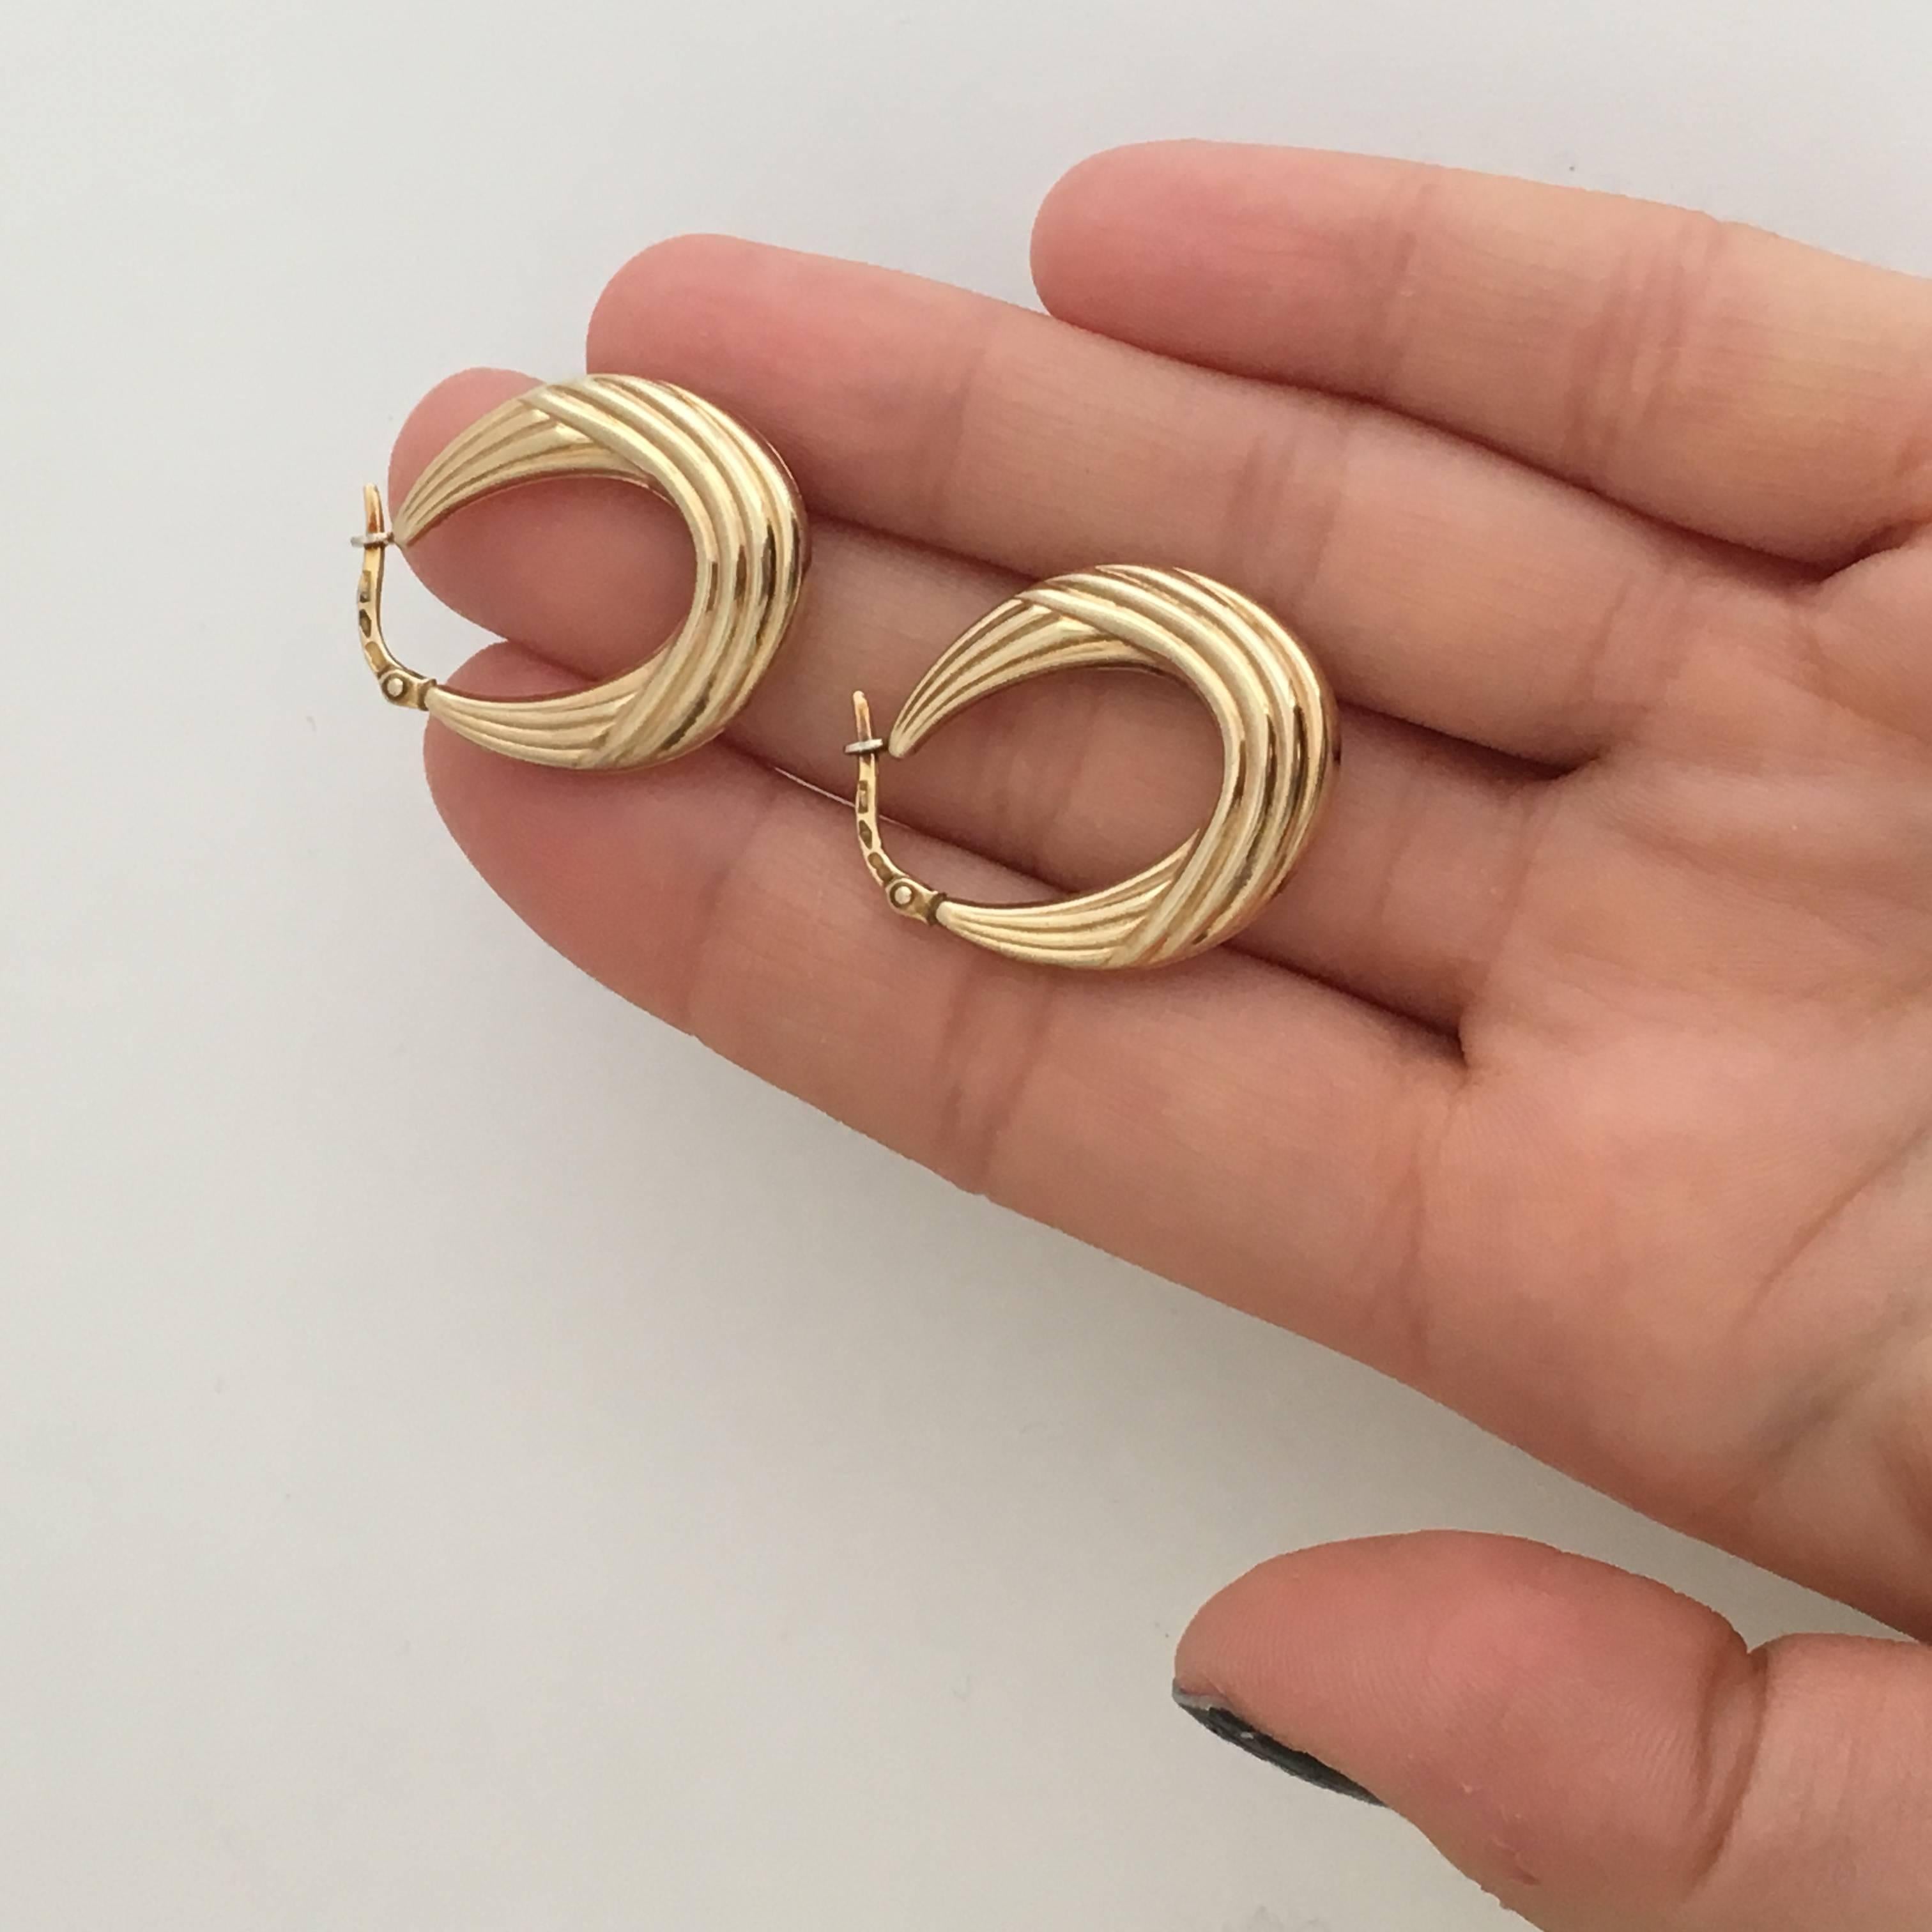 1980s Vintage Jewelry Gold Hoops Moulded Ribbed Hoop Earrings In Excellent Condition For Sale In London, GB